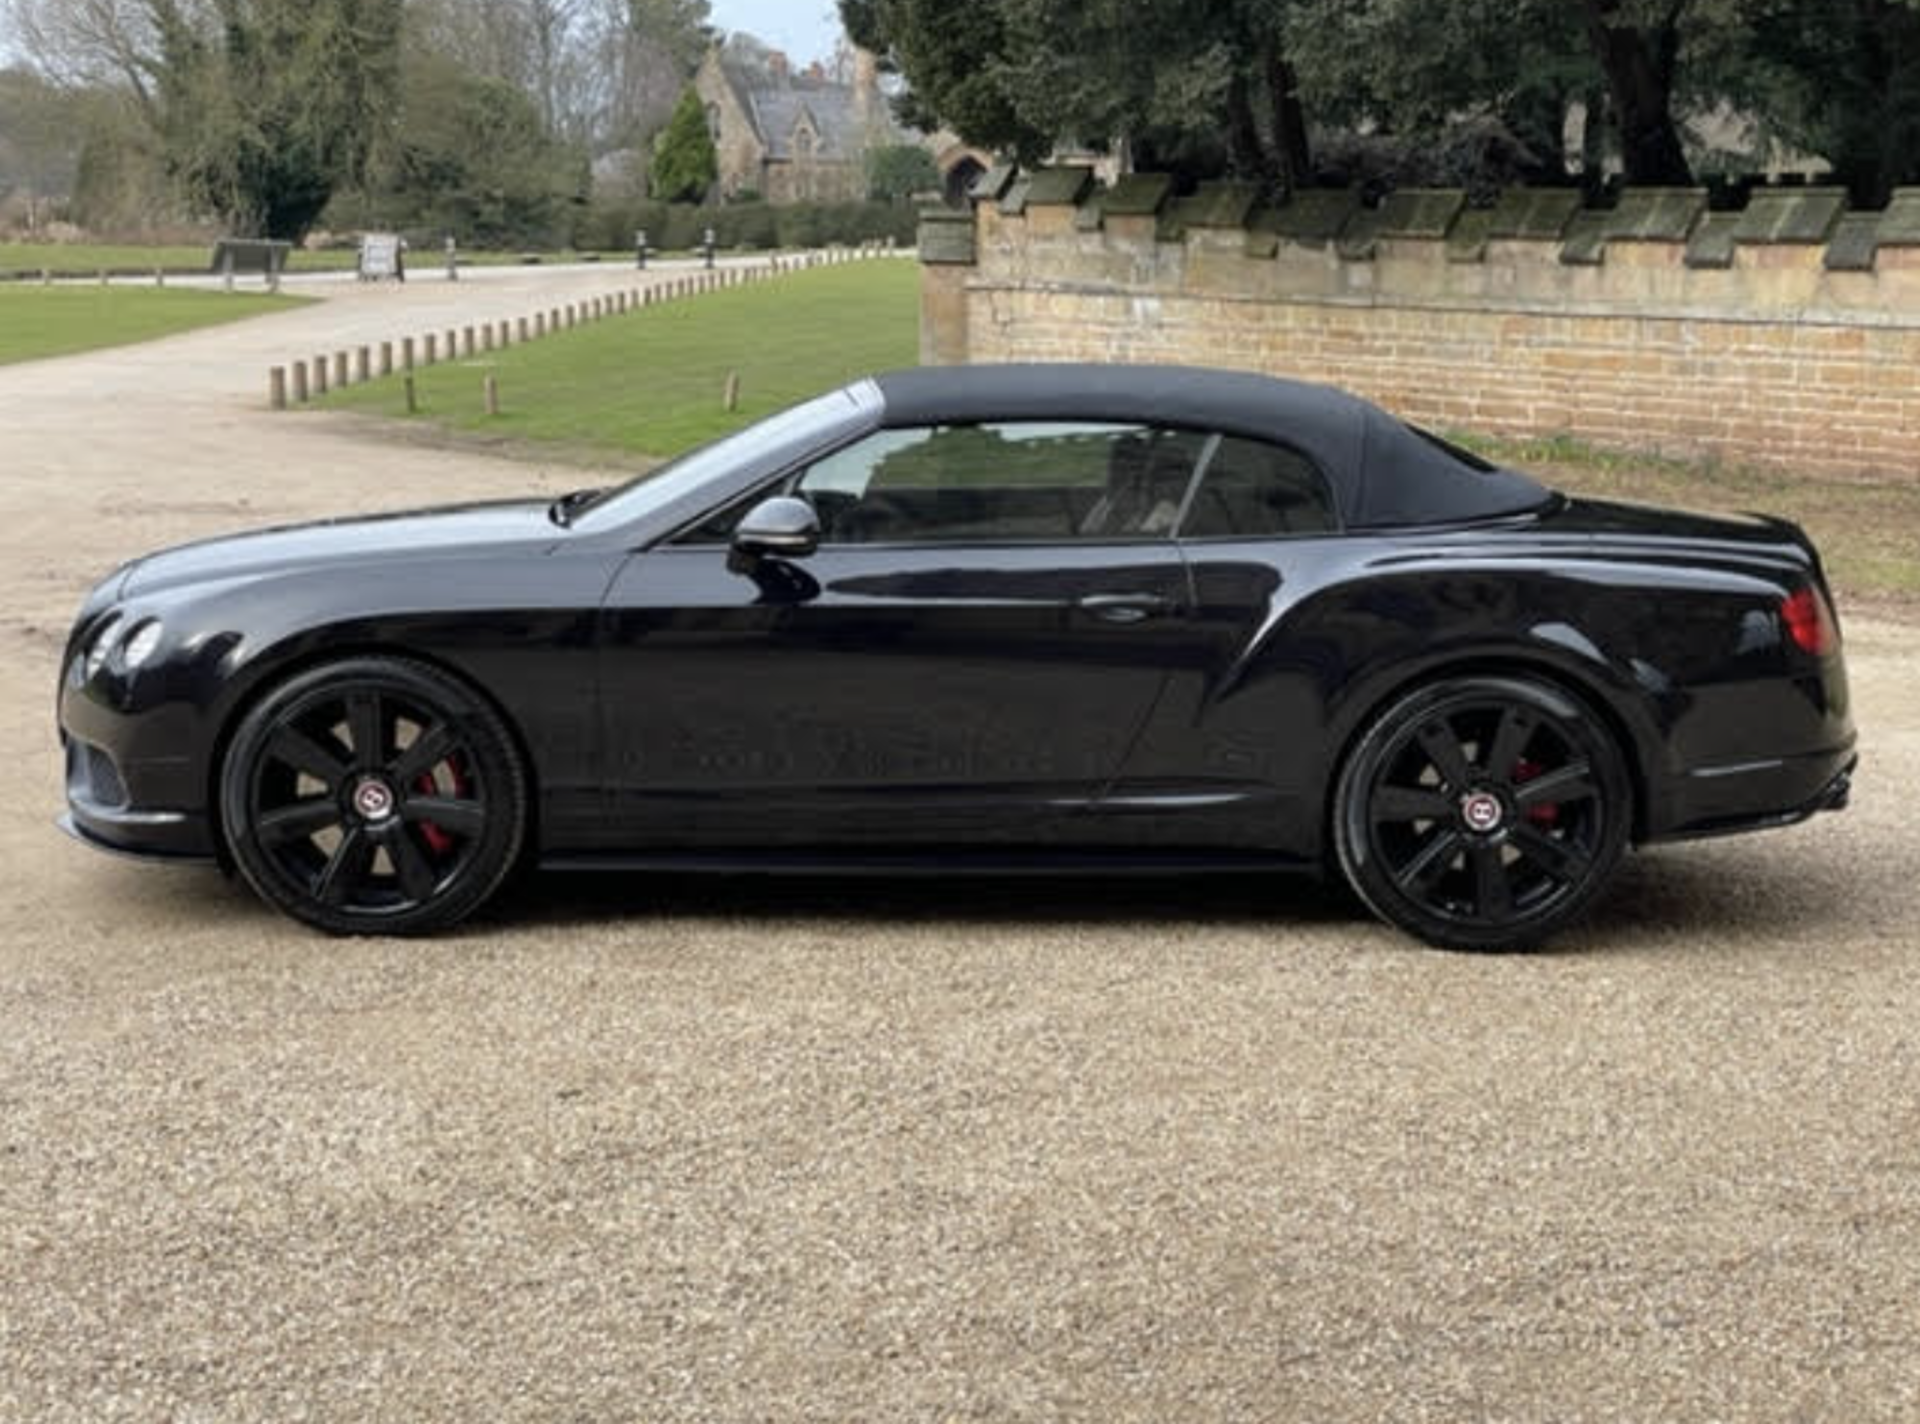 2015 Bentley Continental GTC 4.0 V8 S 2dr Auto Concourse series - Black pack 58,000 miles Full S/H - Image 3 of 18